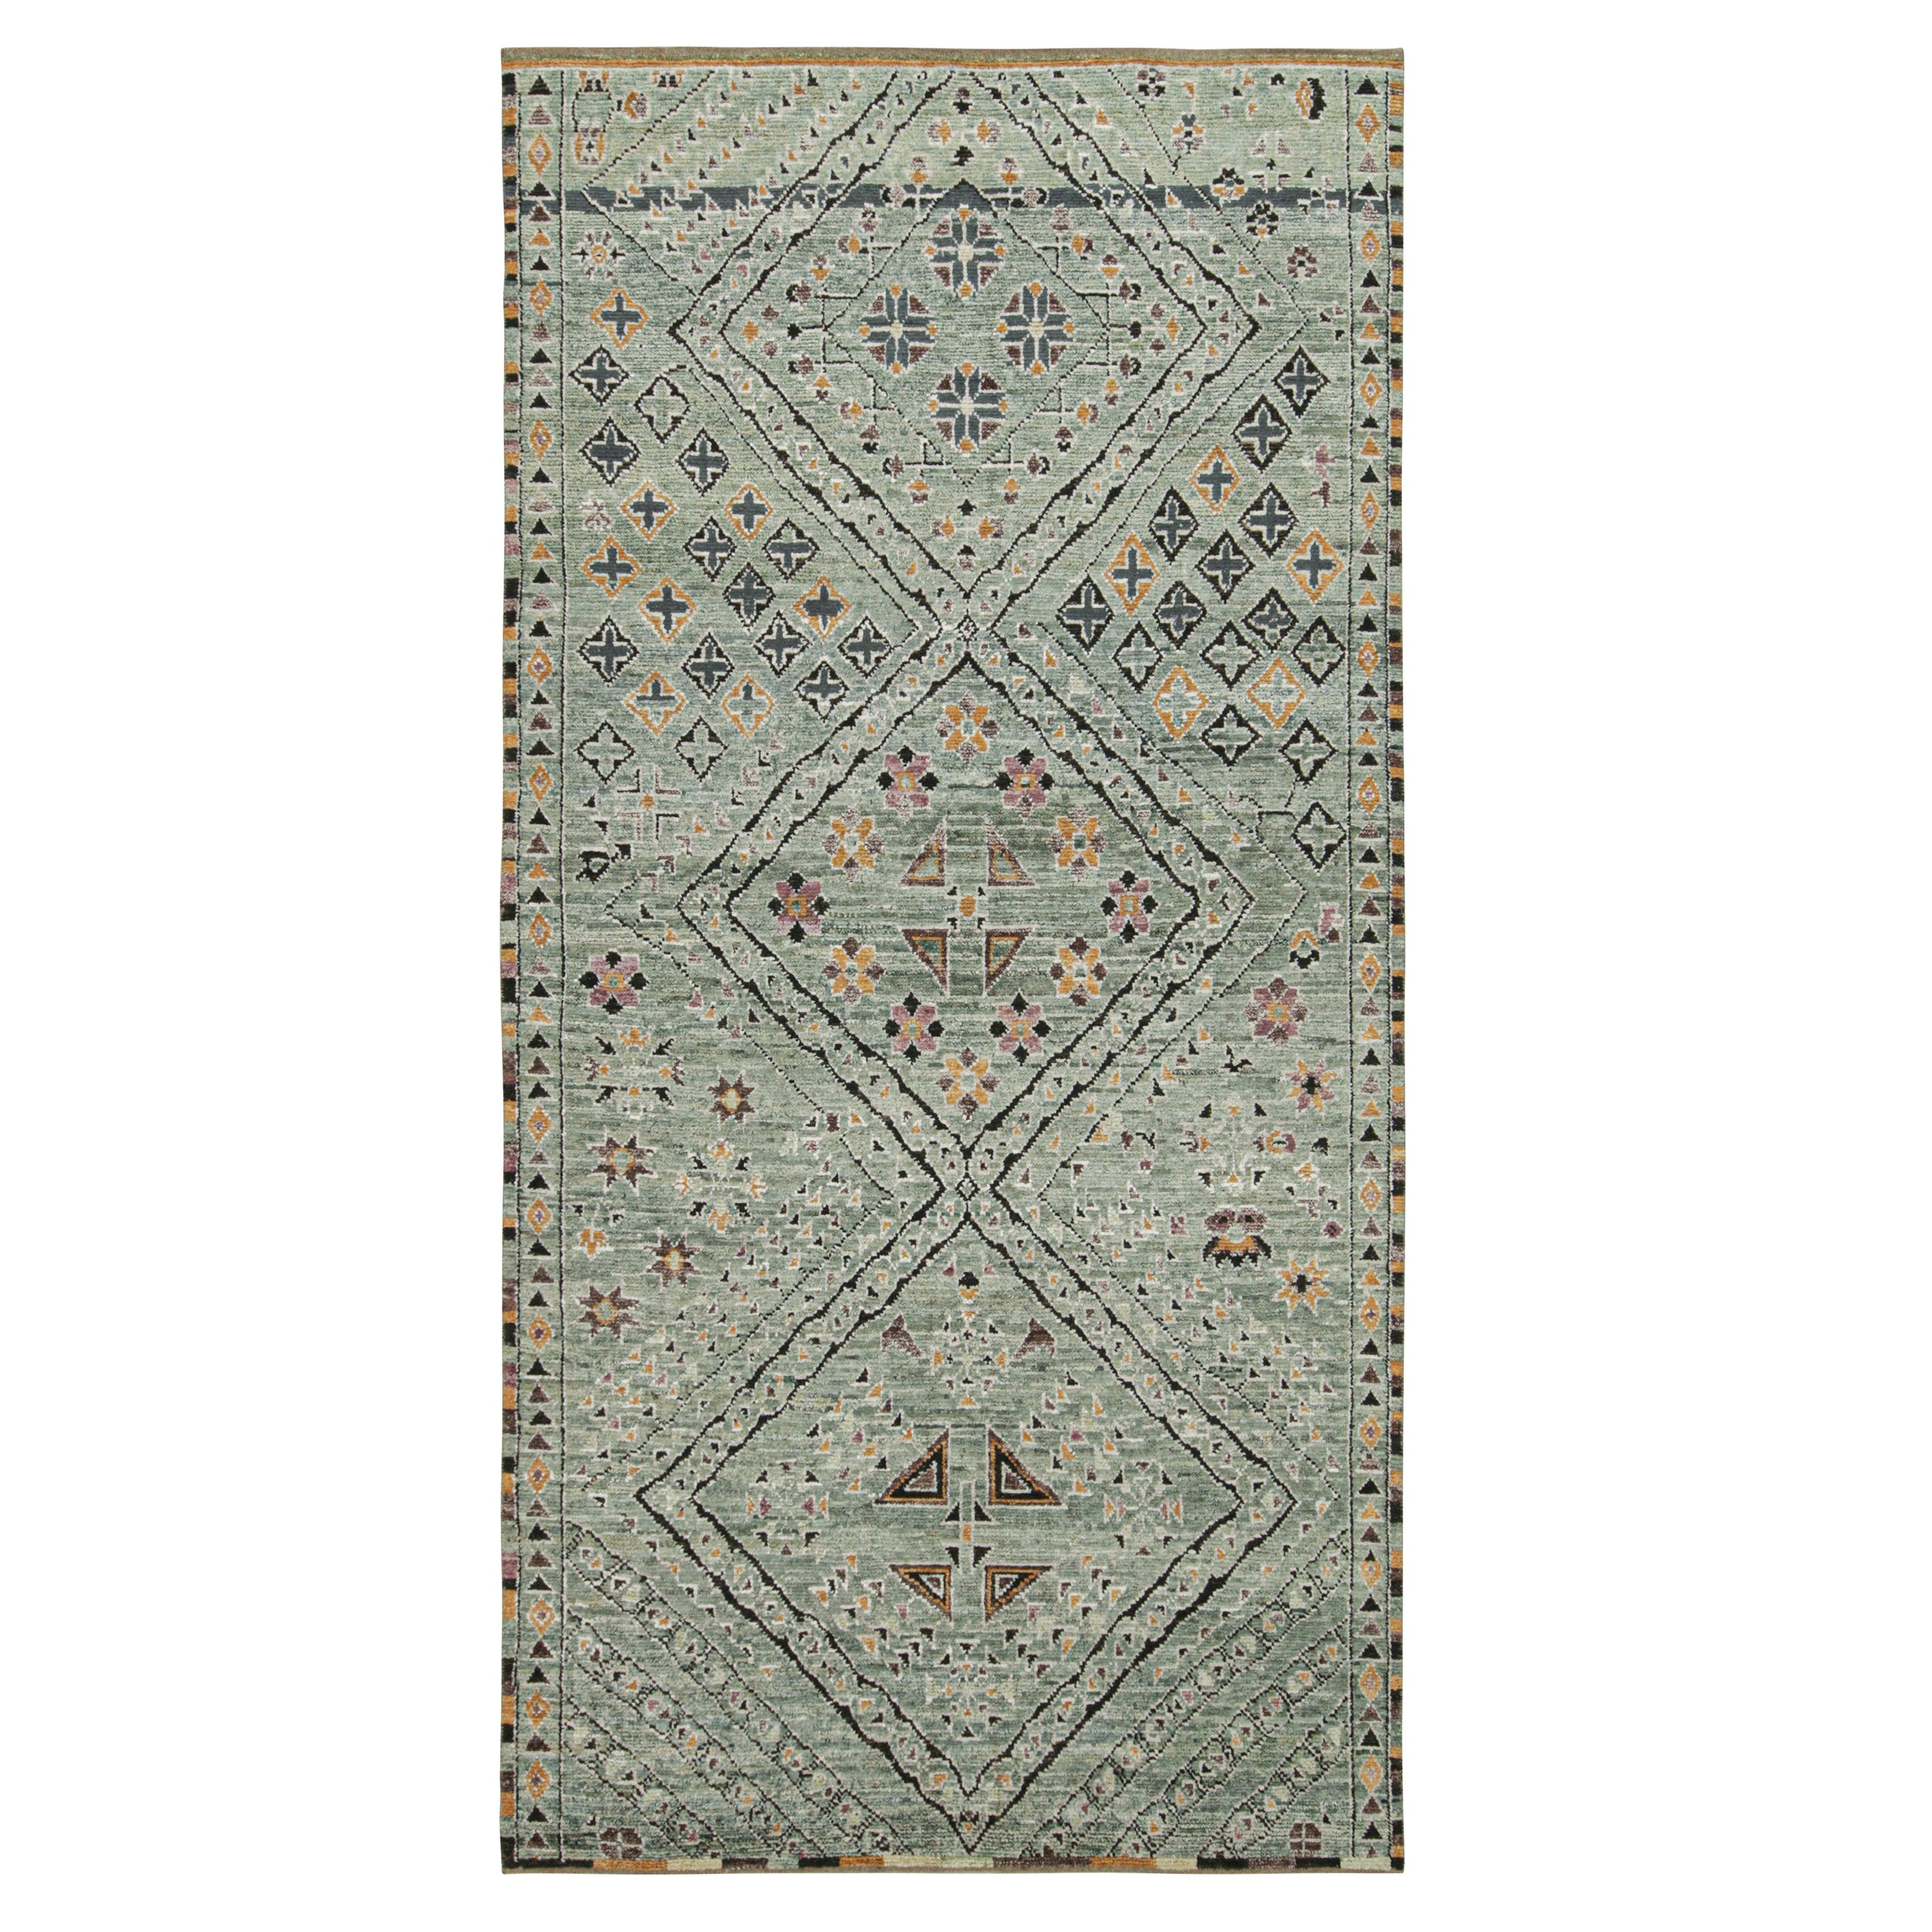 Rug & Kilim’s Moroccan Style Gallery Runner in Teal with Geometric Patterns For Sale